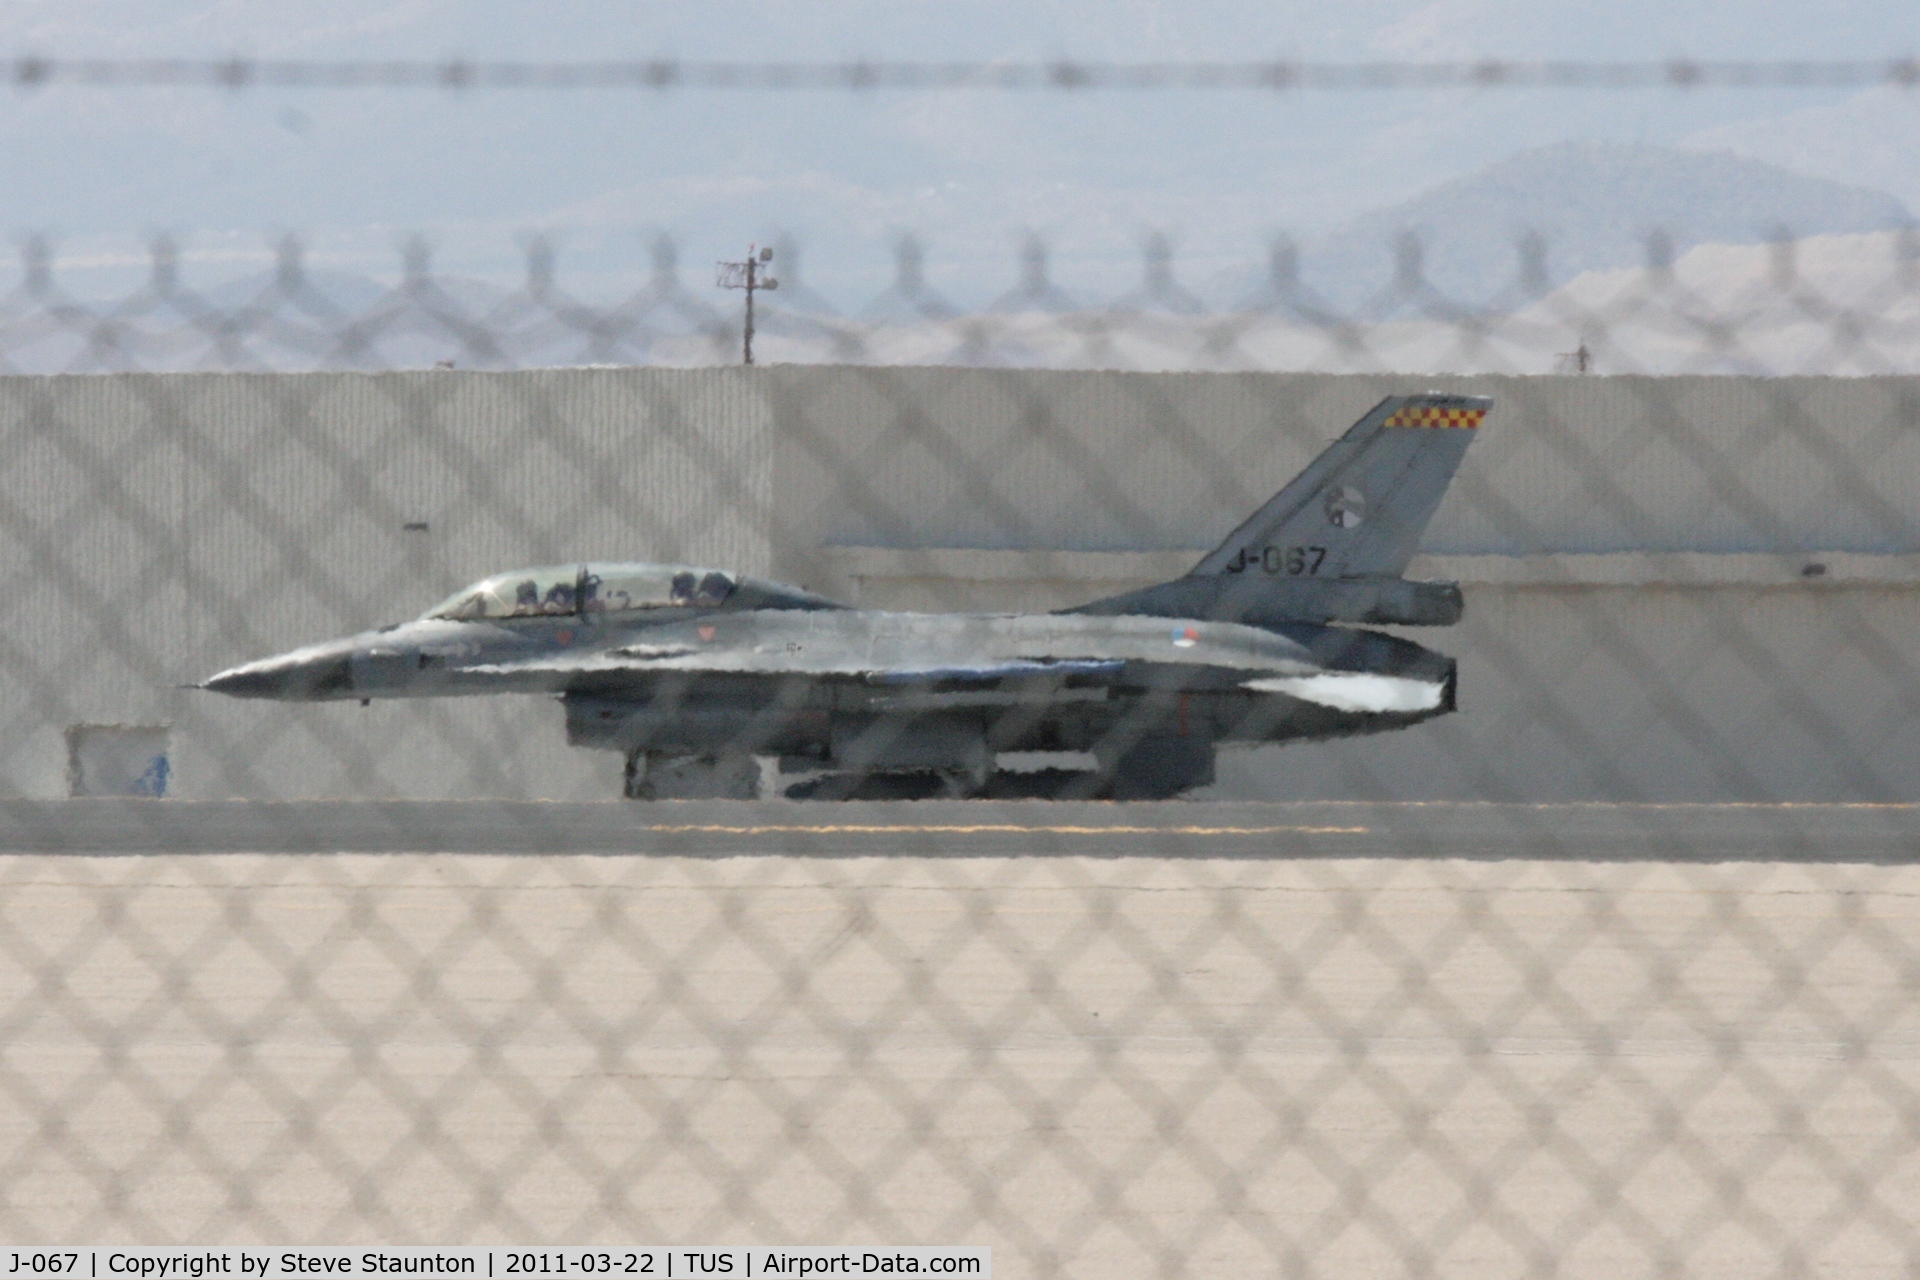 J-067, General Dynamics F-16BM C/N F-16BM Fighting Falcon, Taken at Tucson International Airport, in March 2011 whilst on an Aeroprint Aviation tour